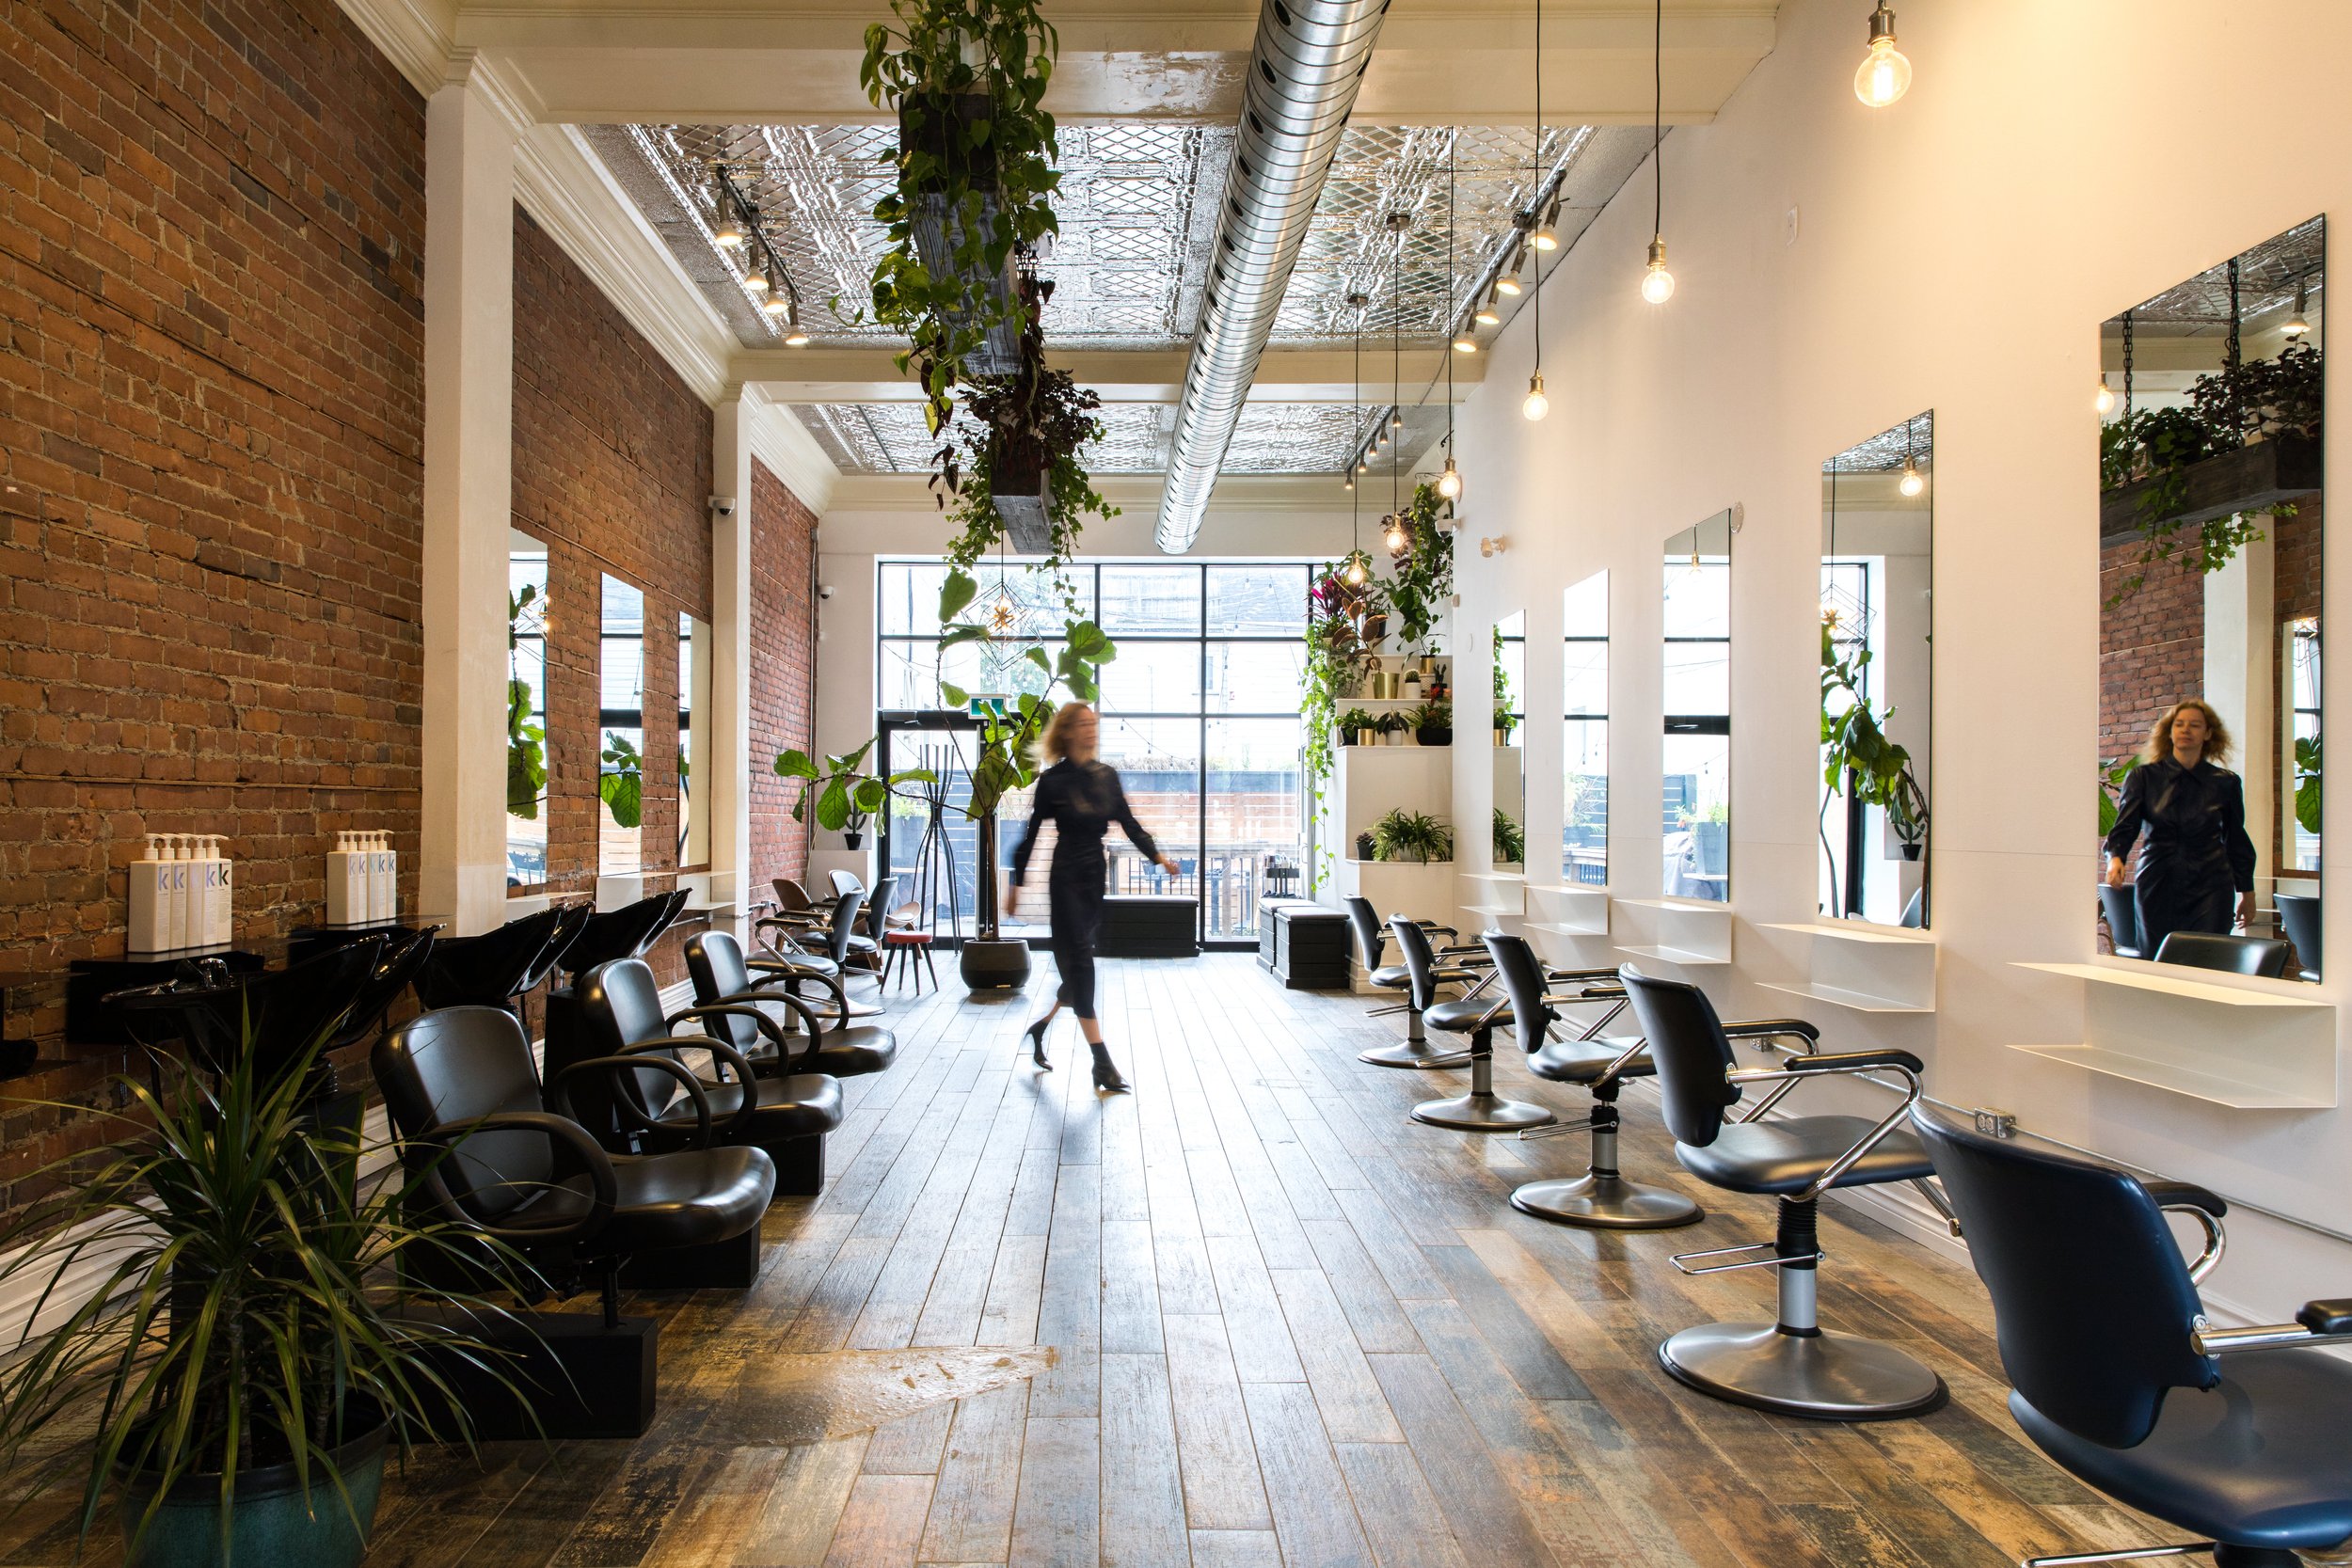 Top hair salon based in Toronto with floor to ceiling windows and exposed brick walls